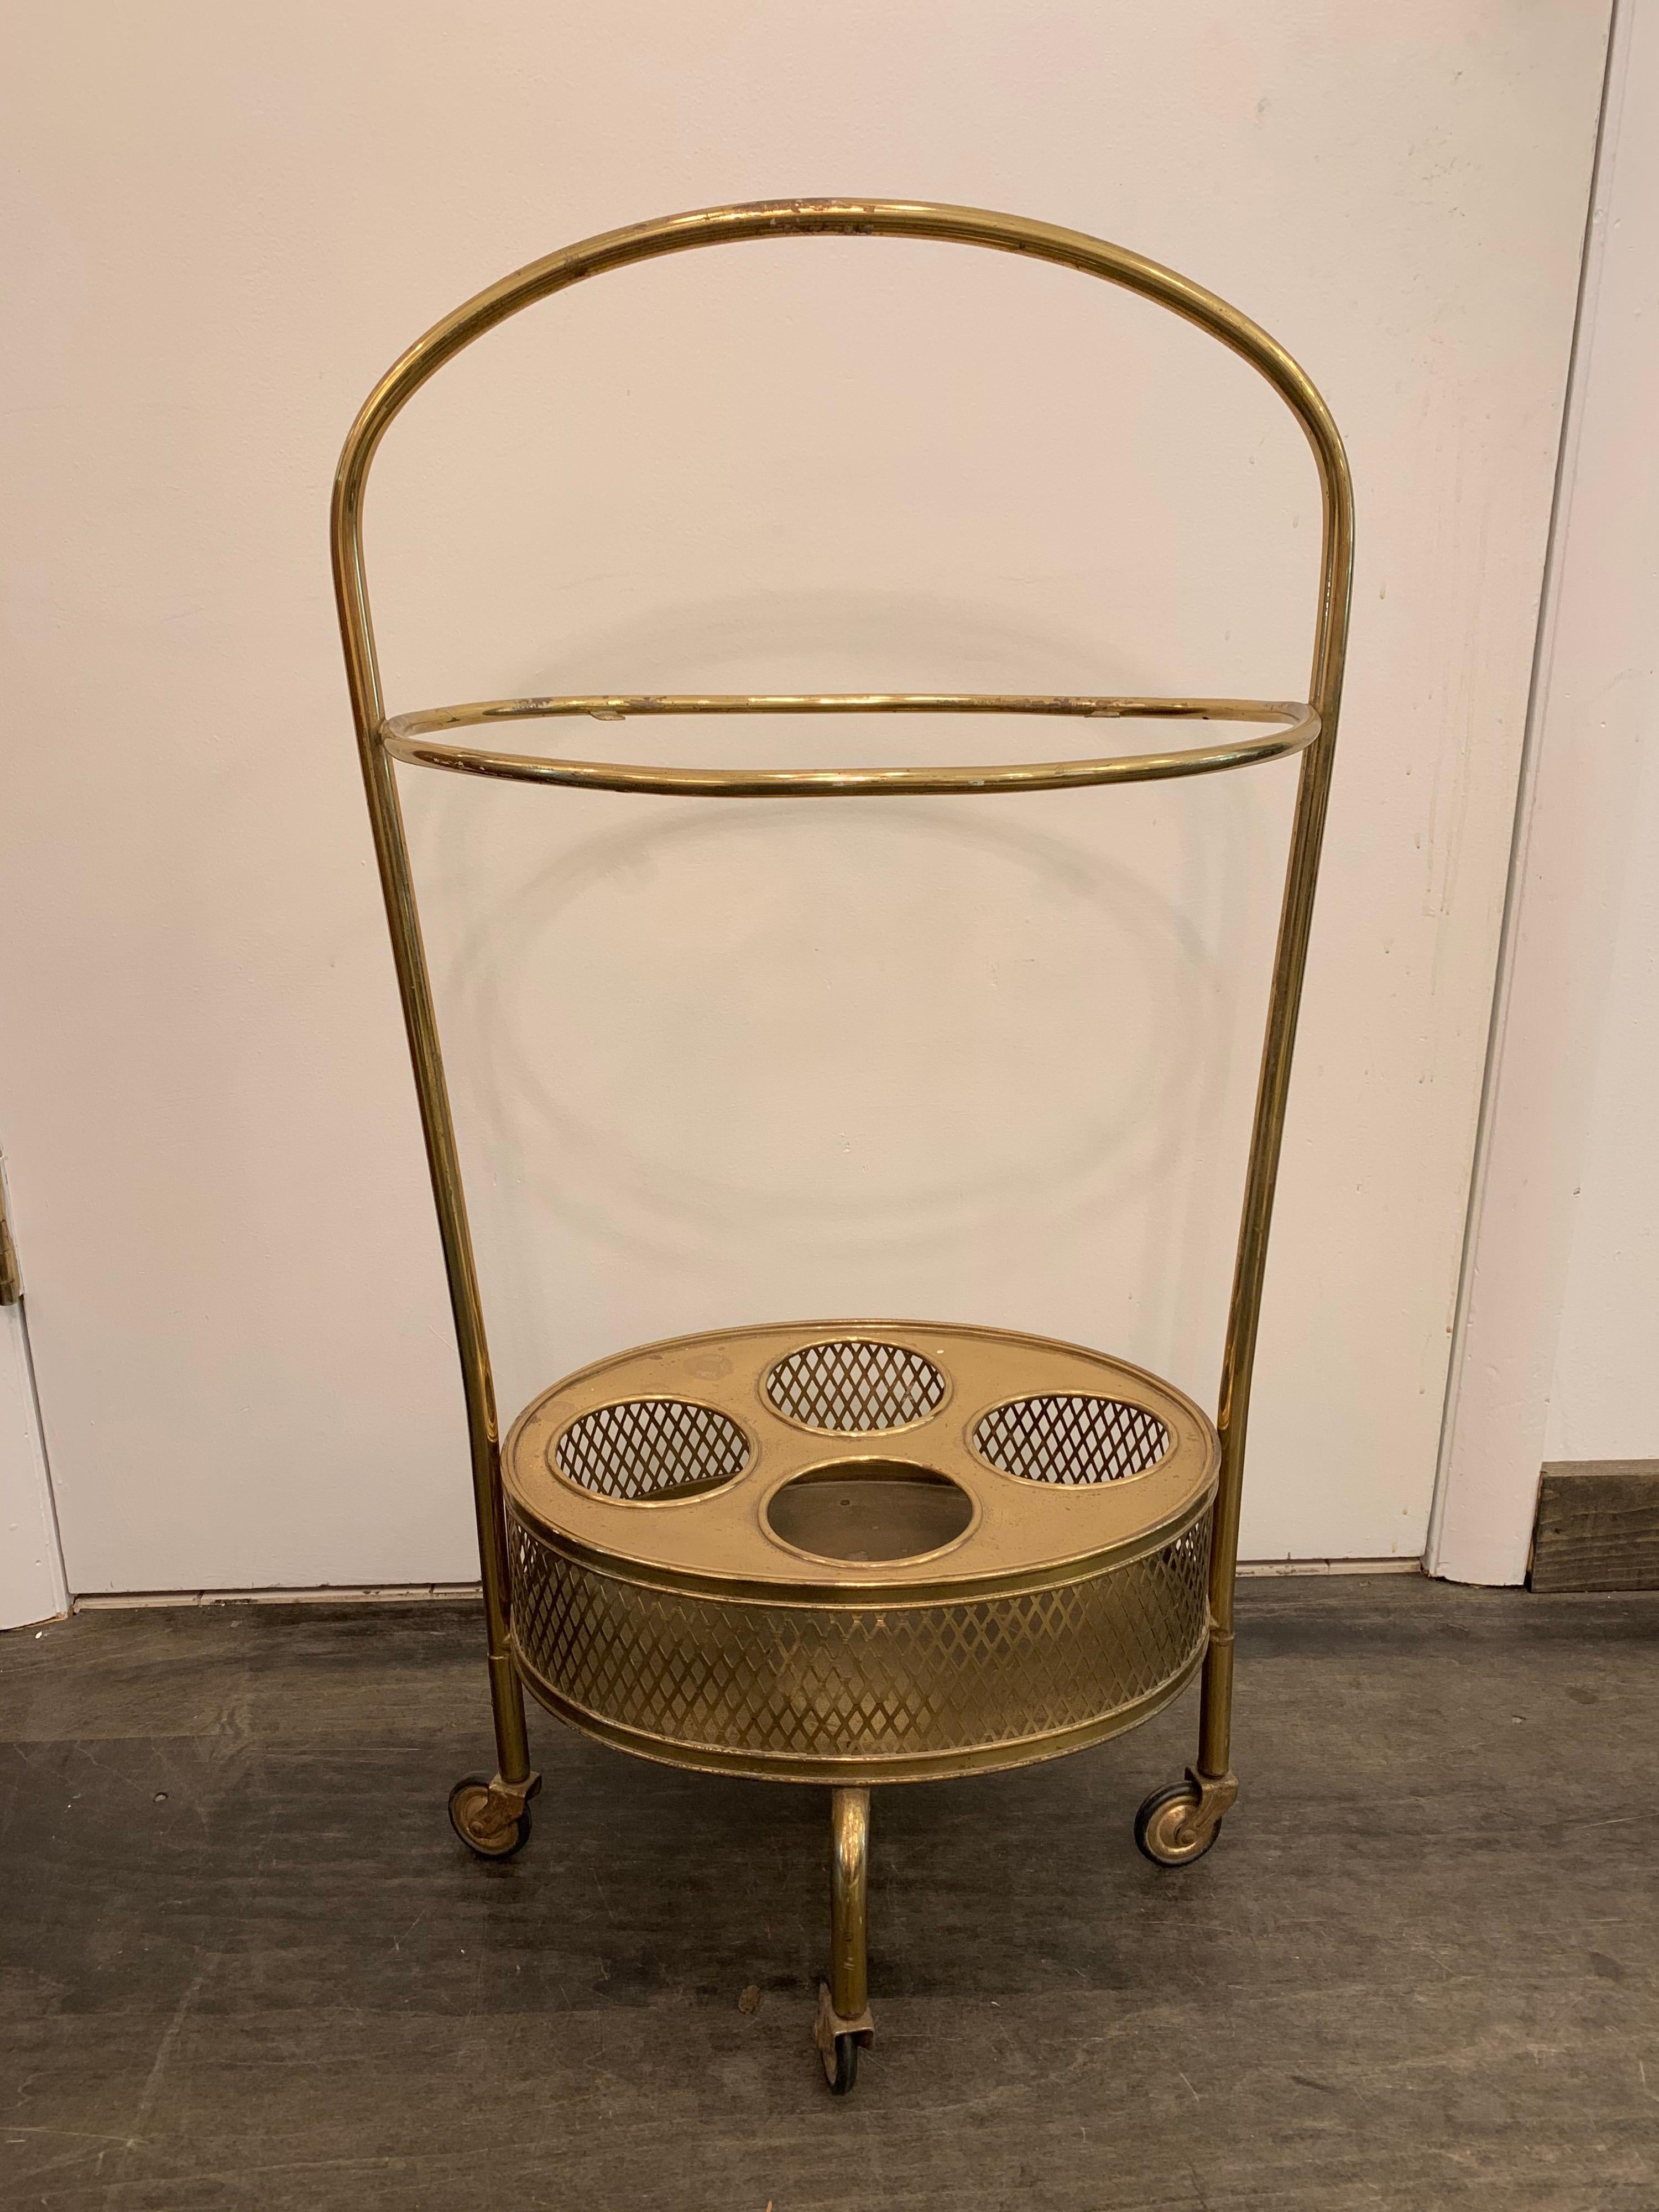 Italian Art Deco Drinks Caddy/ Bar Cart In Good Condition For Sale In East Hampton, NY